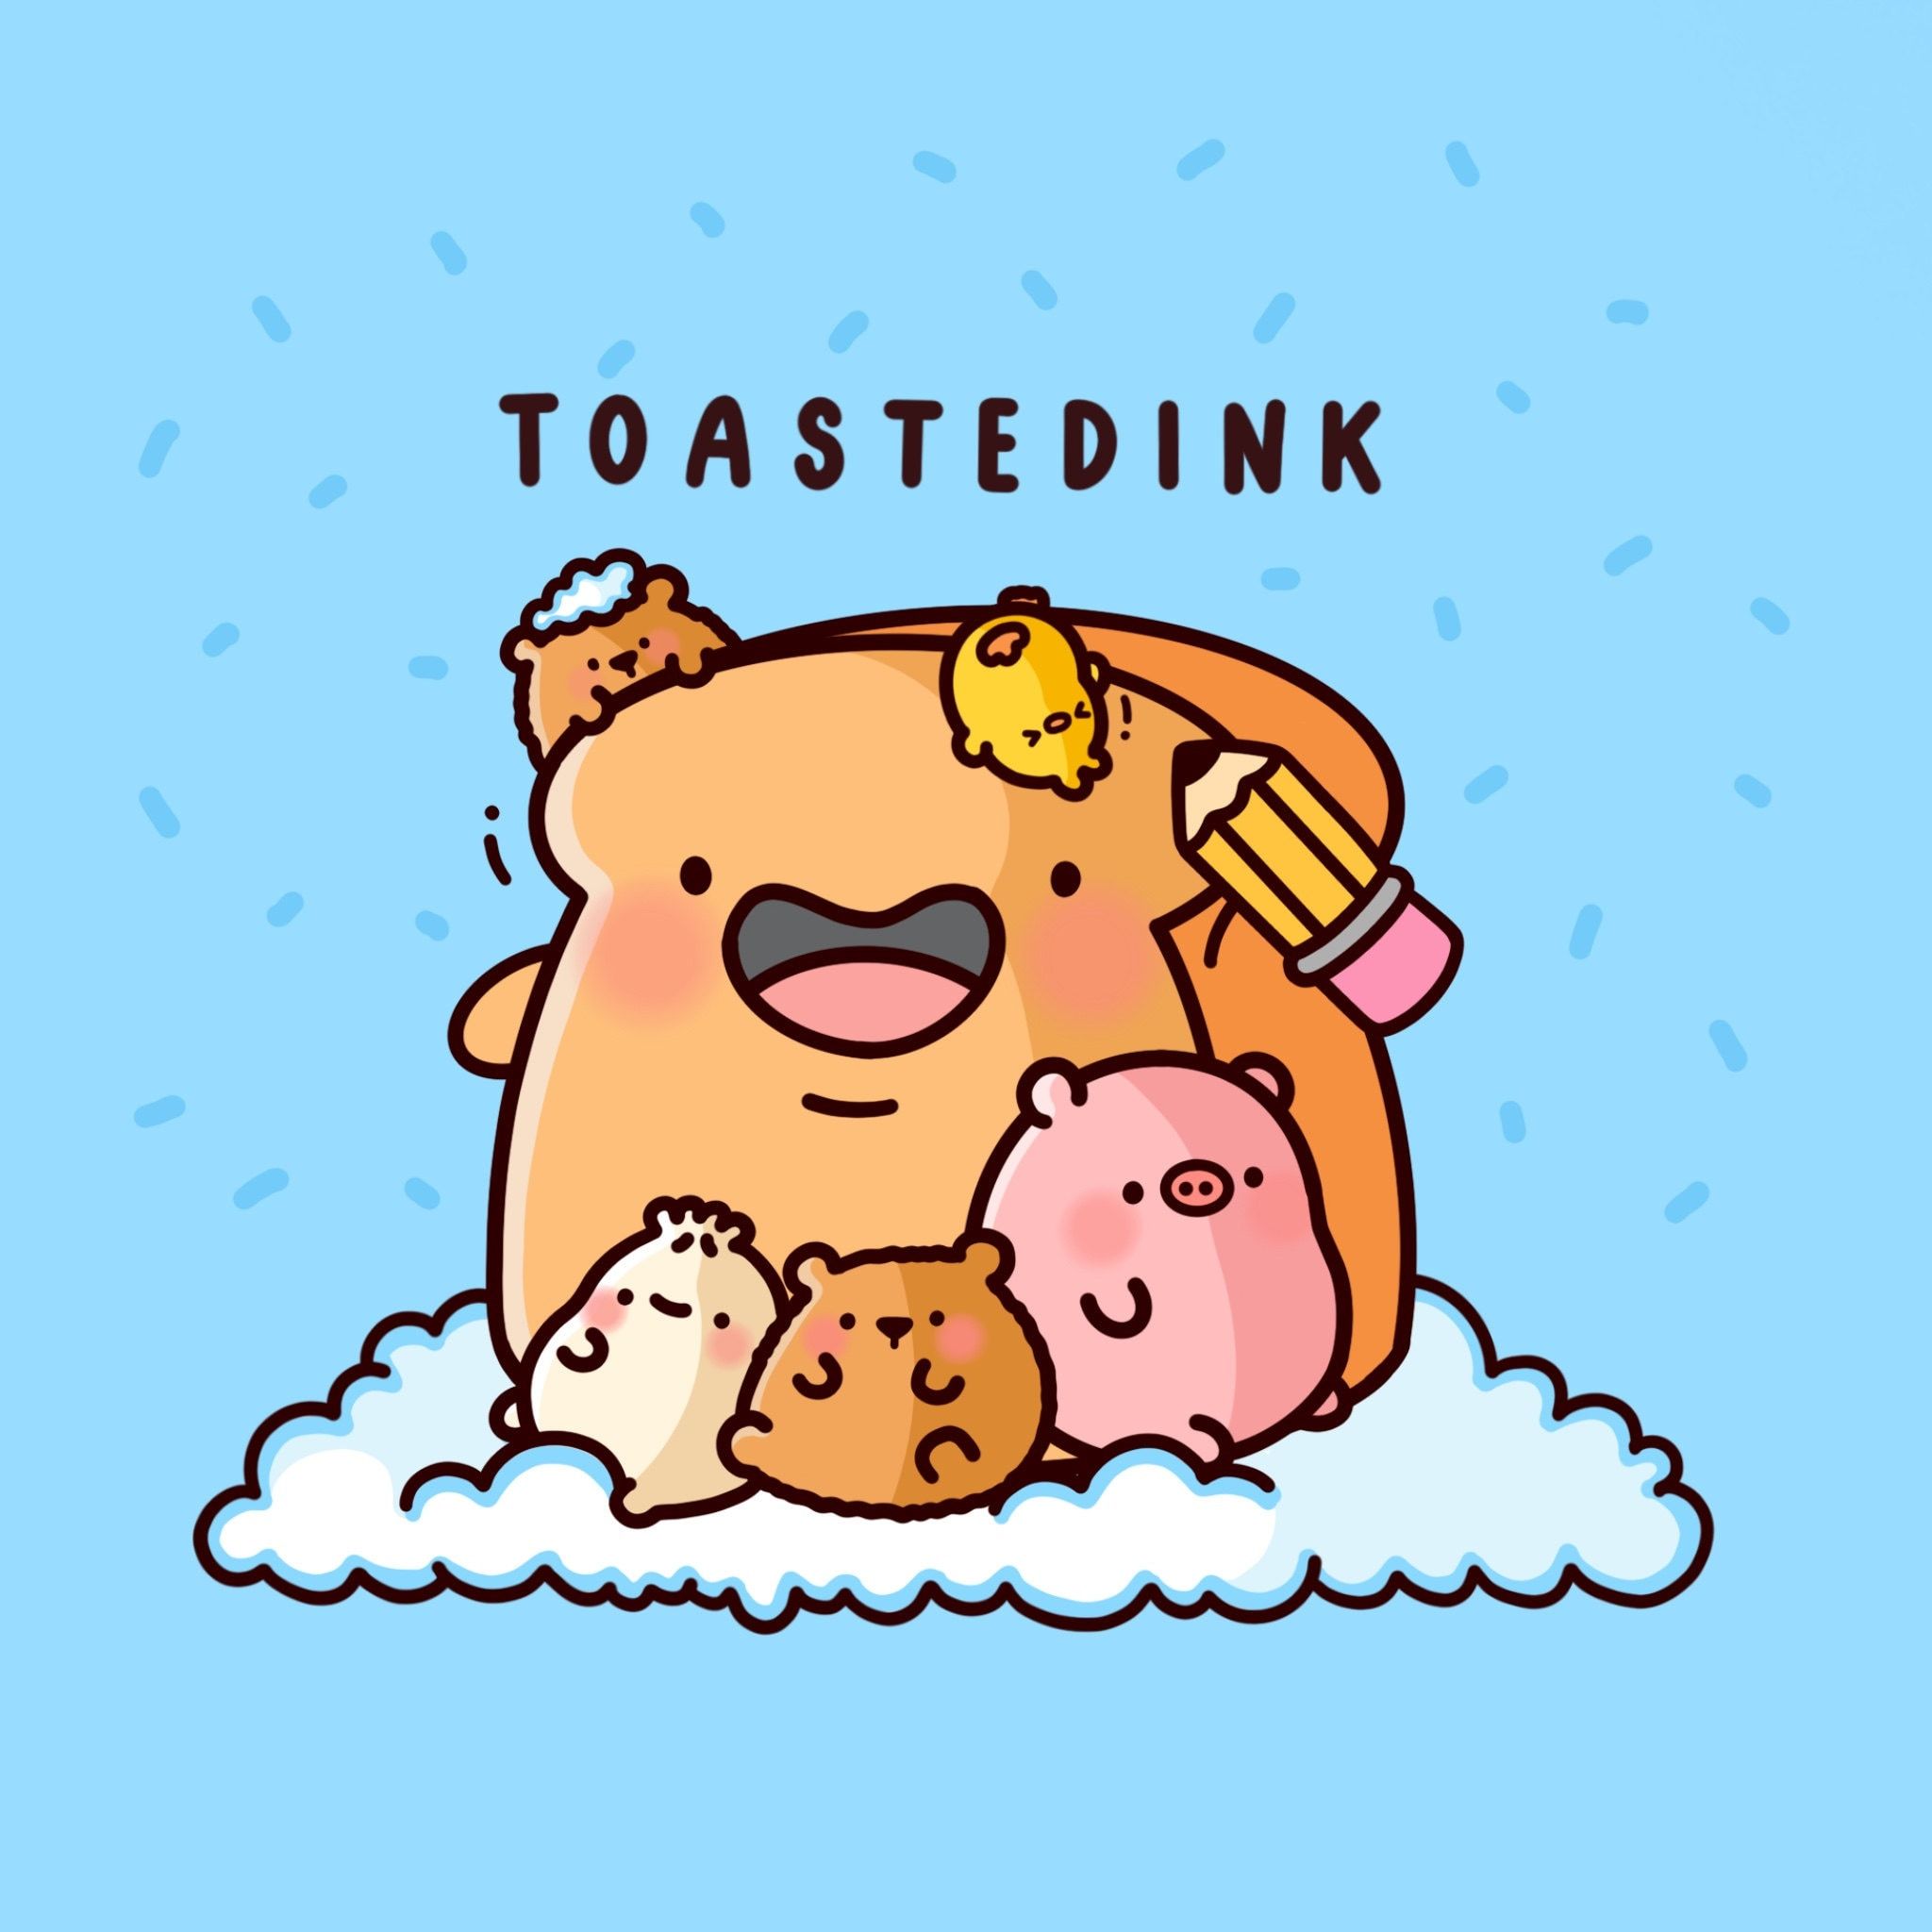 A toasted dink with its family on a cloud - Gudetama